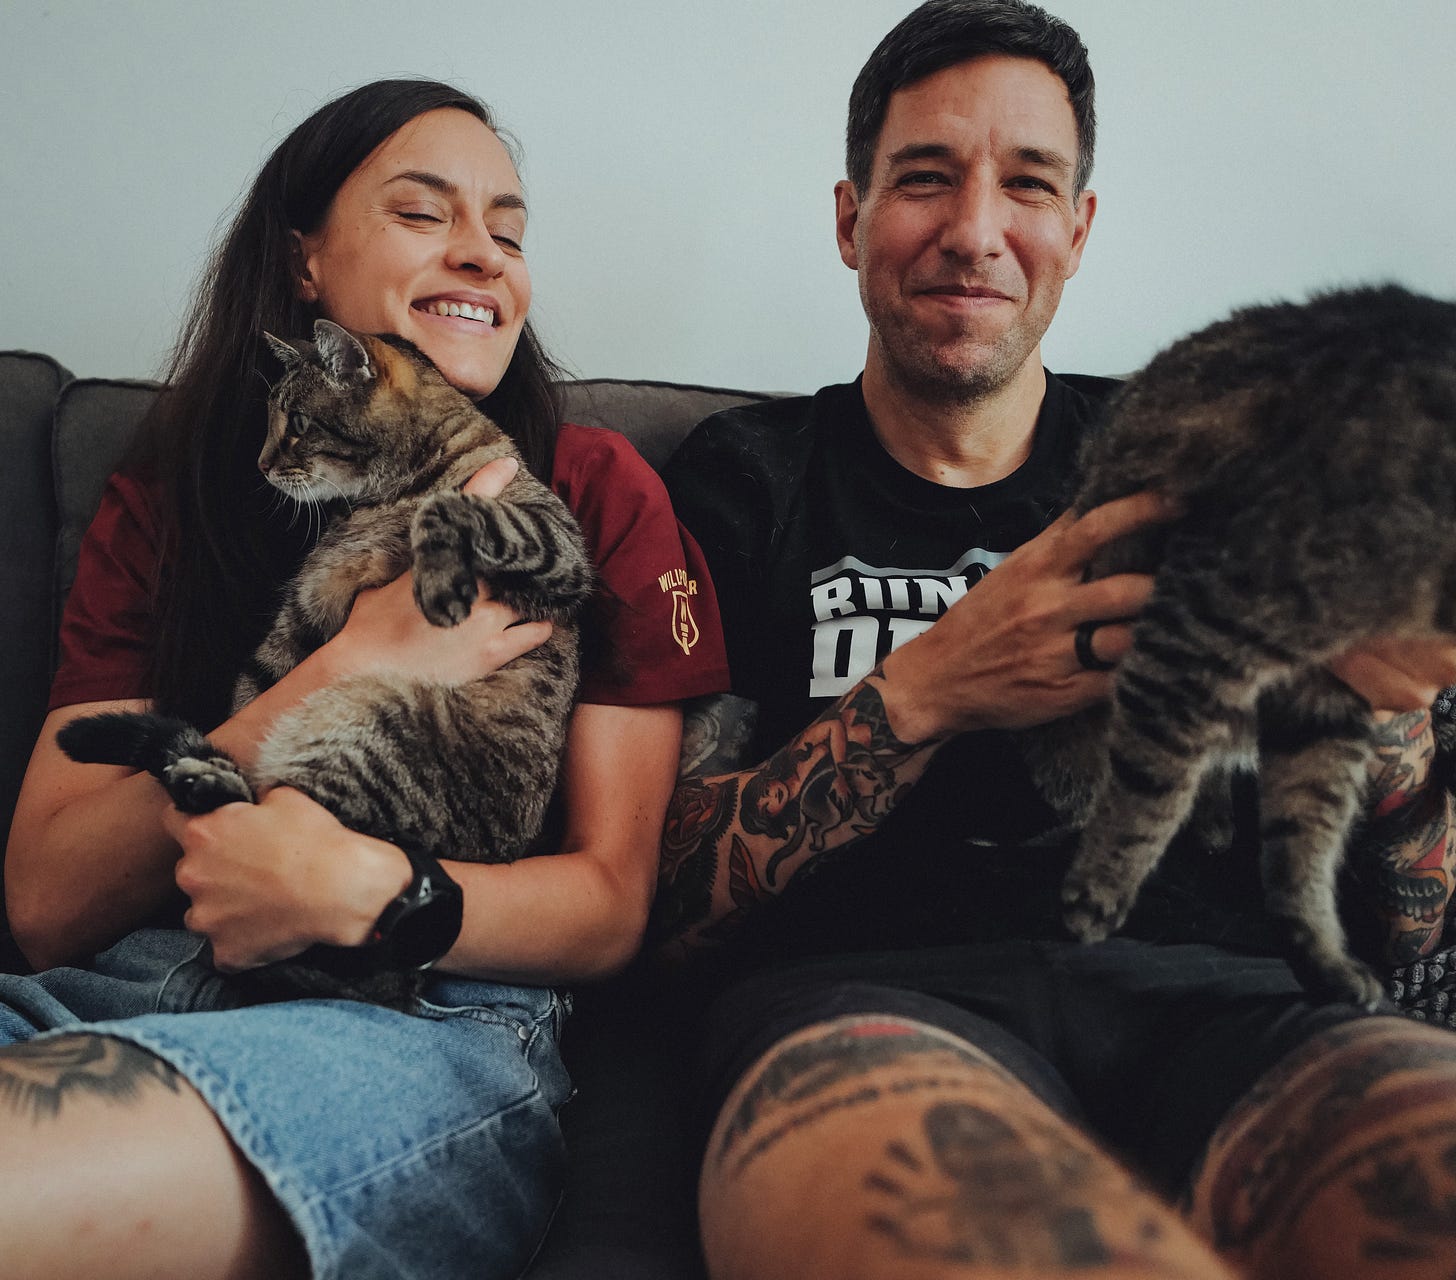 Chris and Lisa with their two cats on a couch with one cat jumping out of the picture